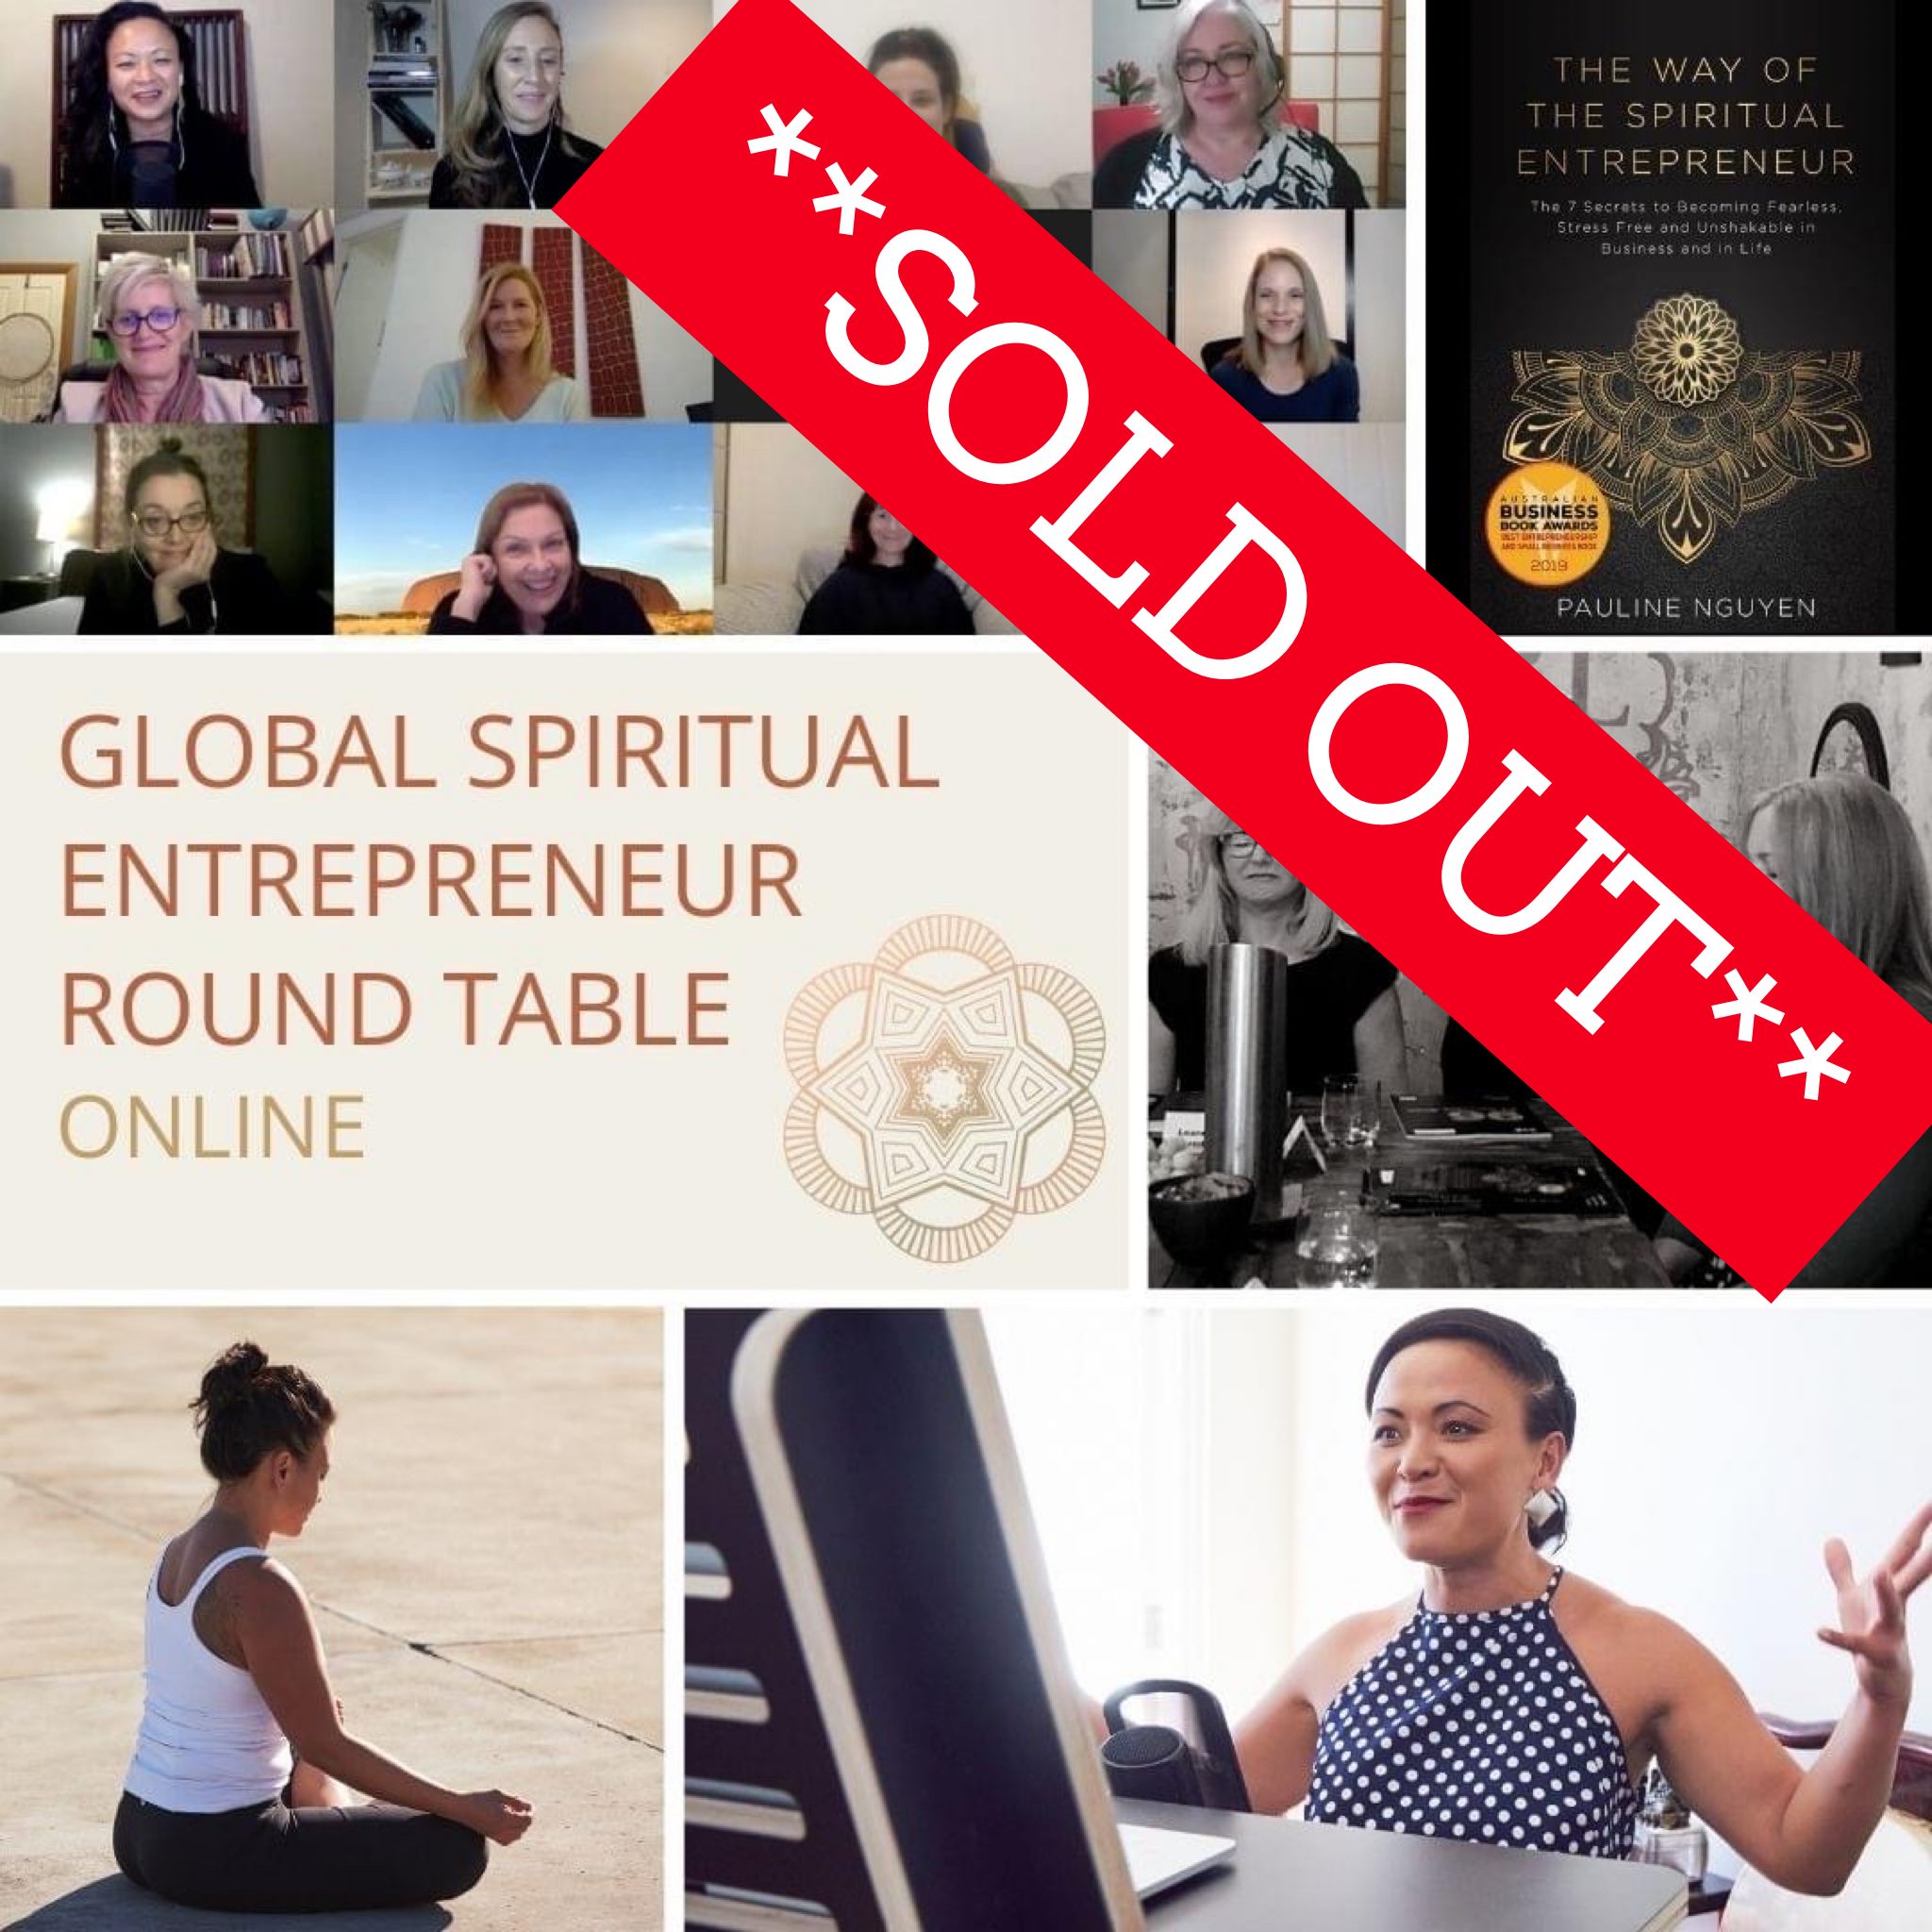 NEW DATE ANNOUNCED: Friday June 4 – THE SPIRITUAL ENTREPRENEUR ROUND TABLE IS BACK!